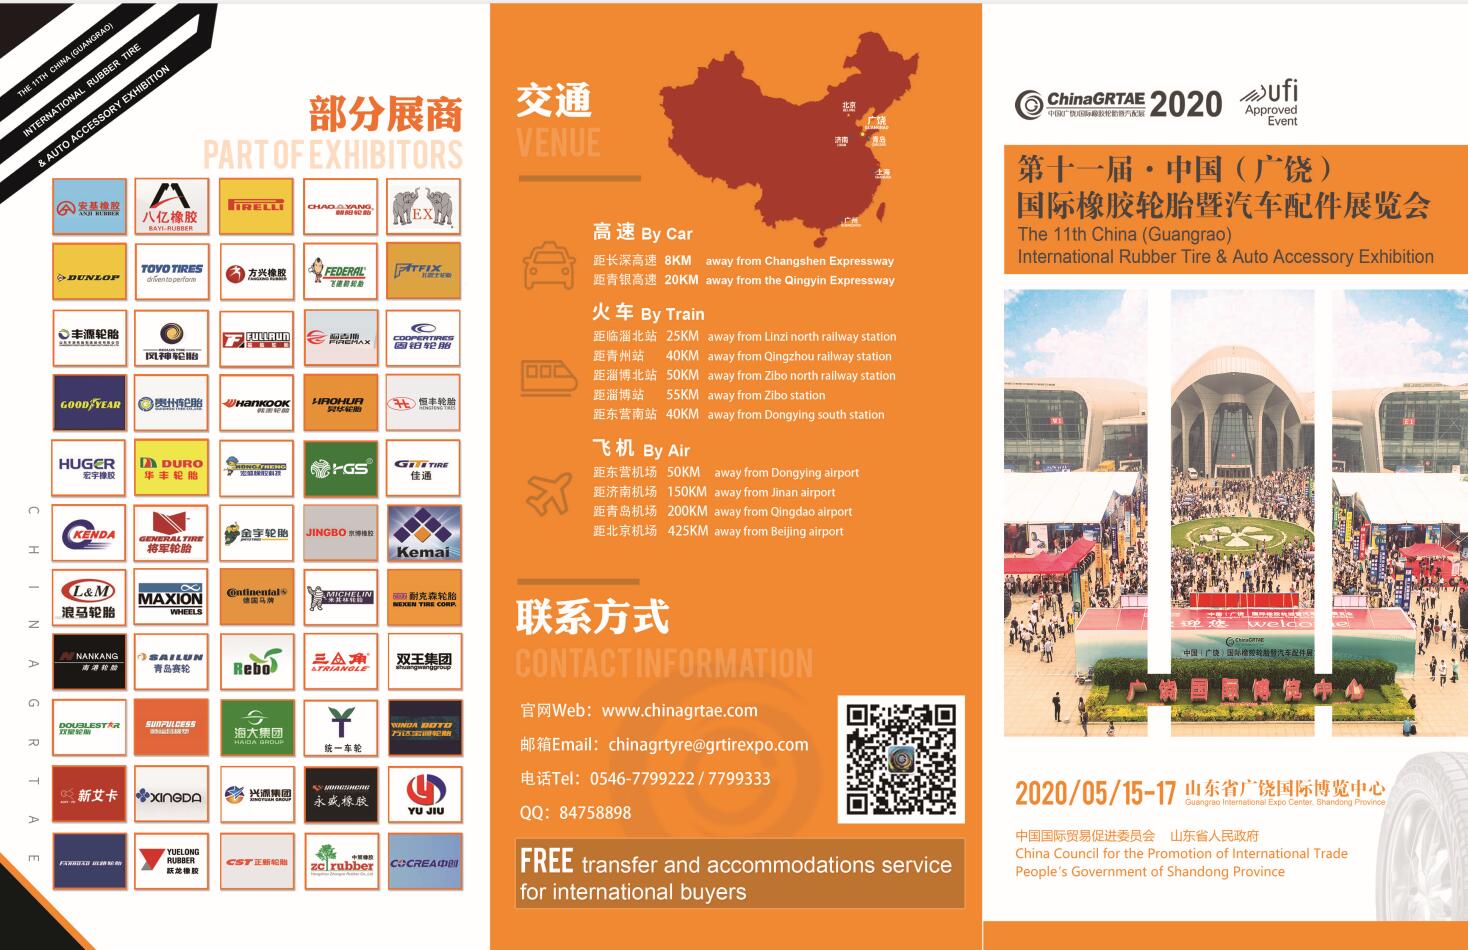 The 11th China (Guangrao) International Rubber Tire & Auto Accessory Exhibition (China GRTAE) 